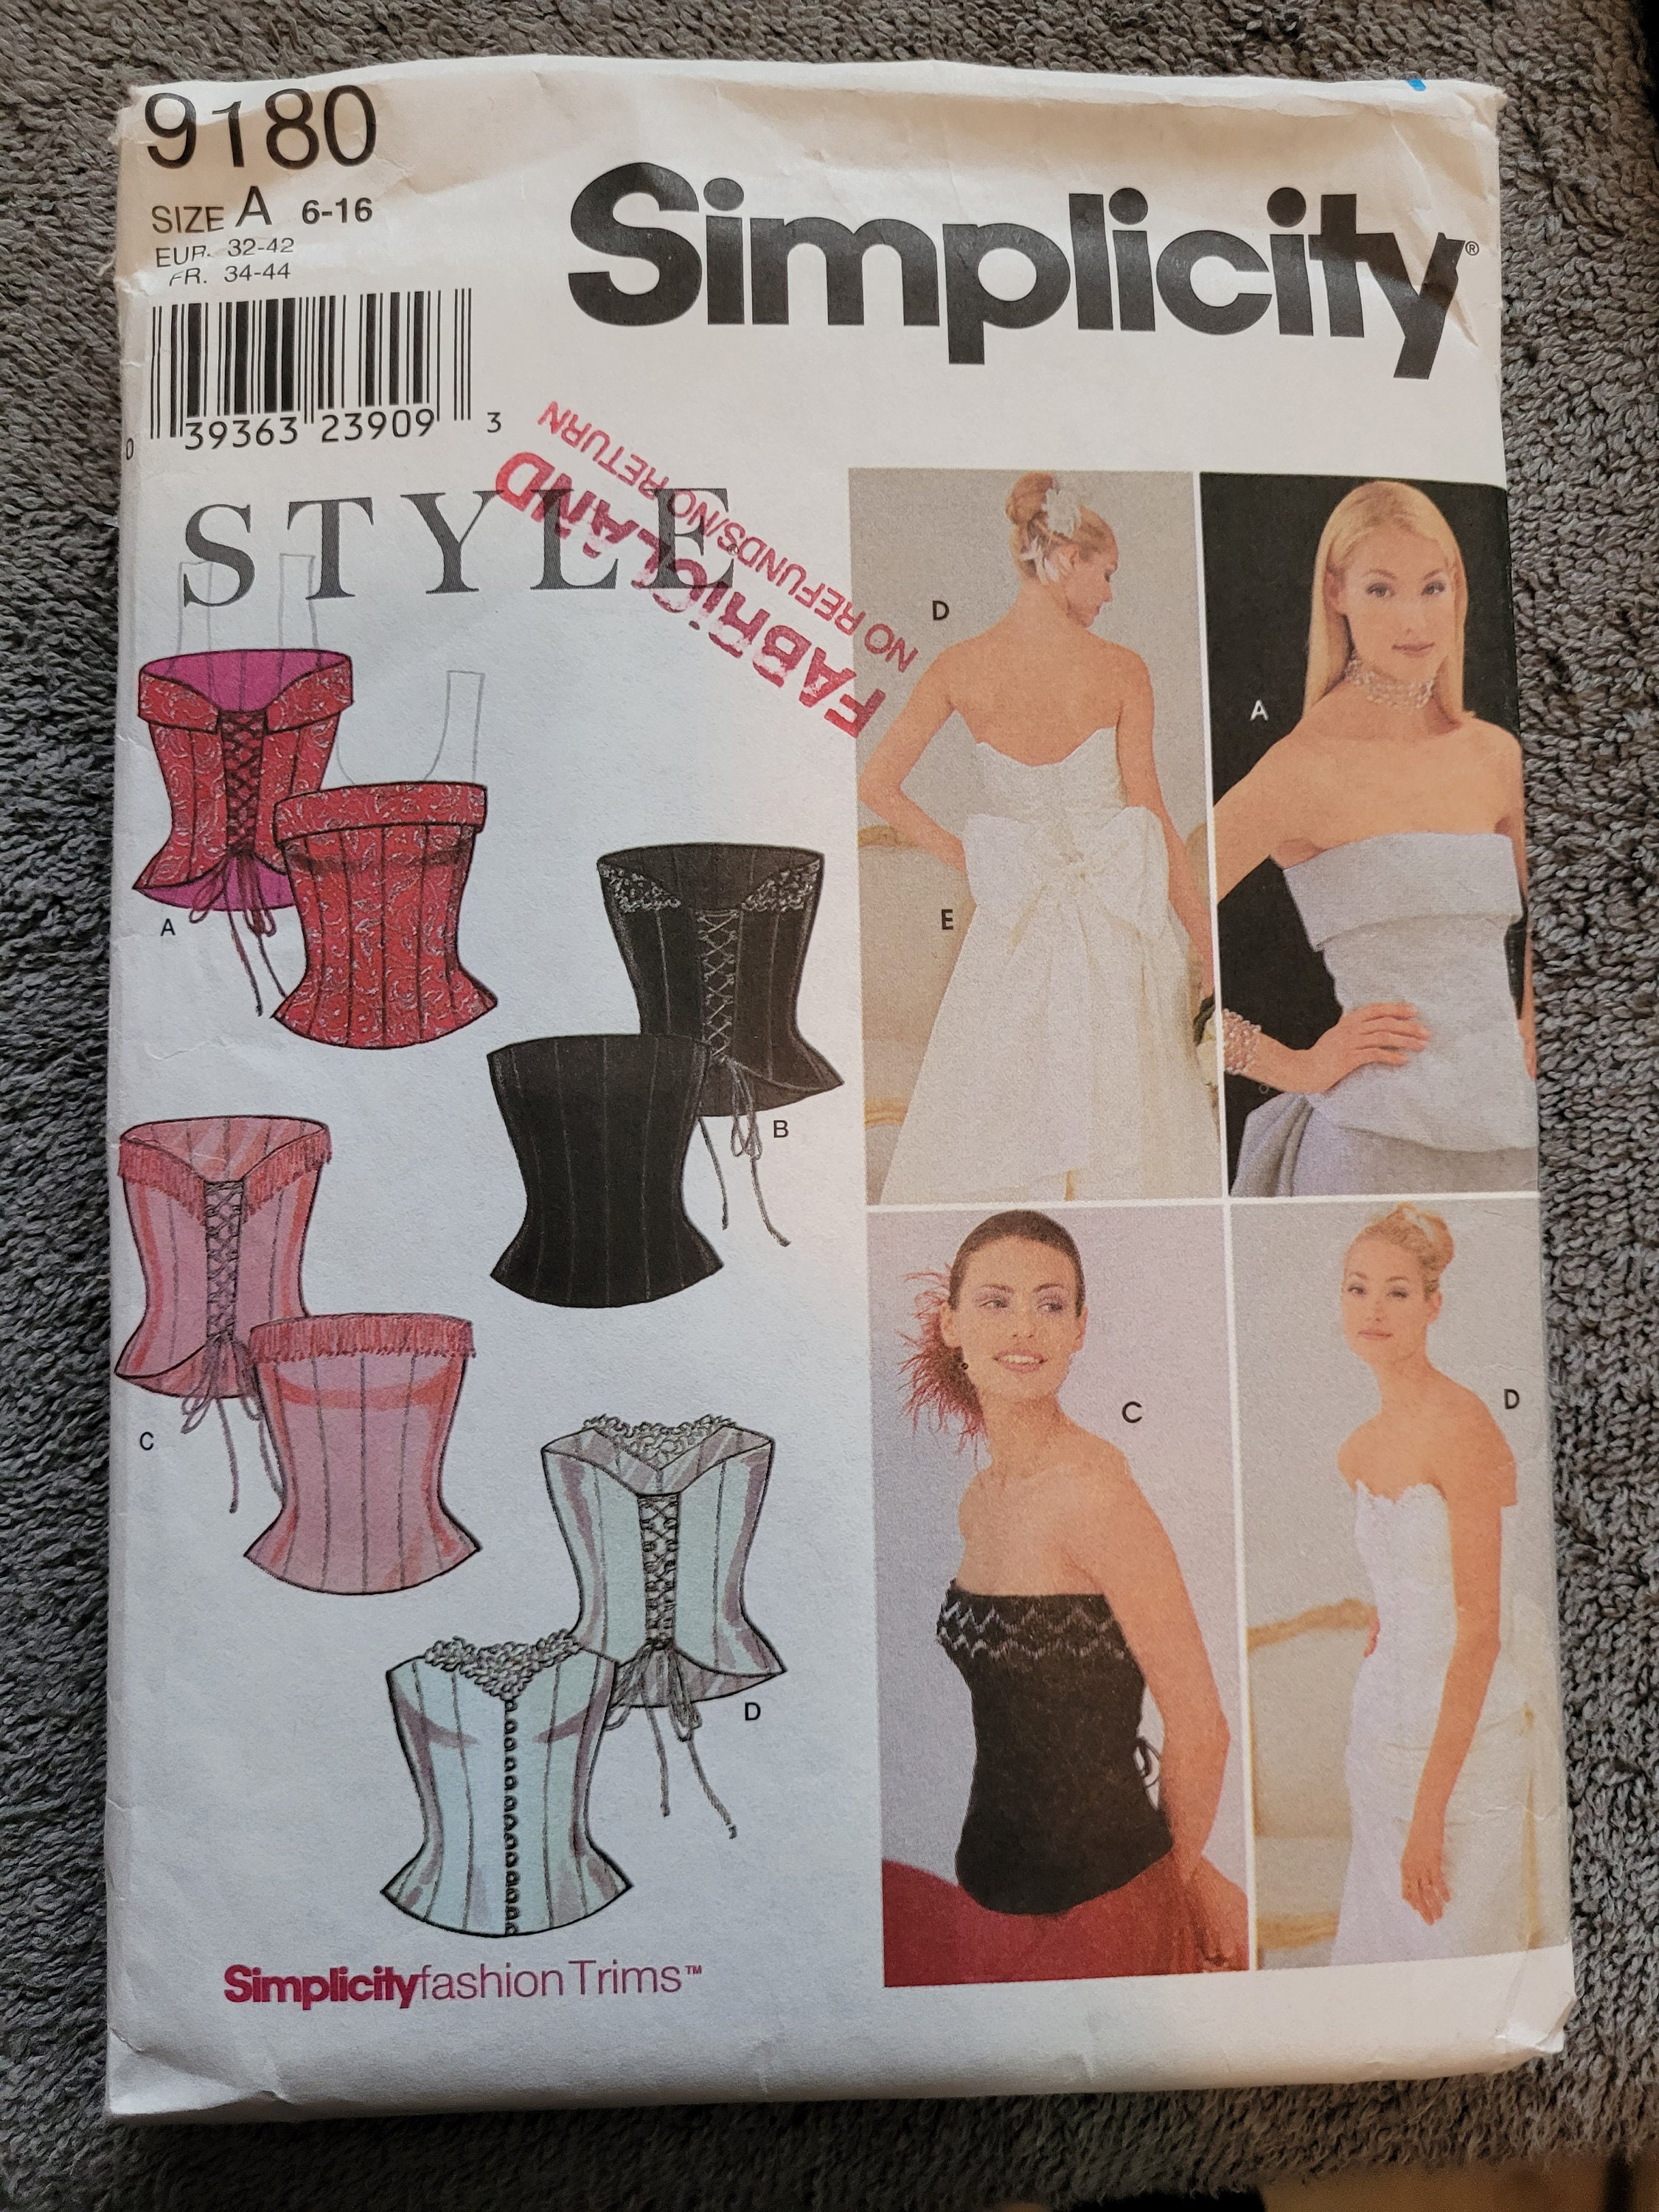 Uncut Simplicity Pattern 9180, Adult Sizes 6-16, Corset Top for Wedding  Prom Dress, Formal Gown, Costume, Quinceañera -  Canada